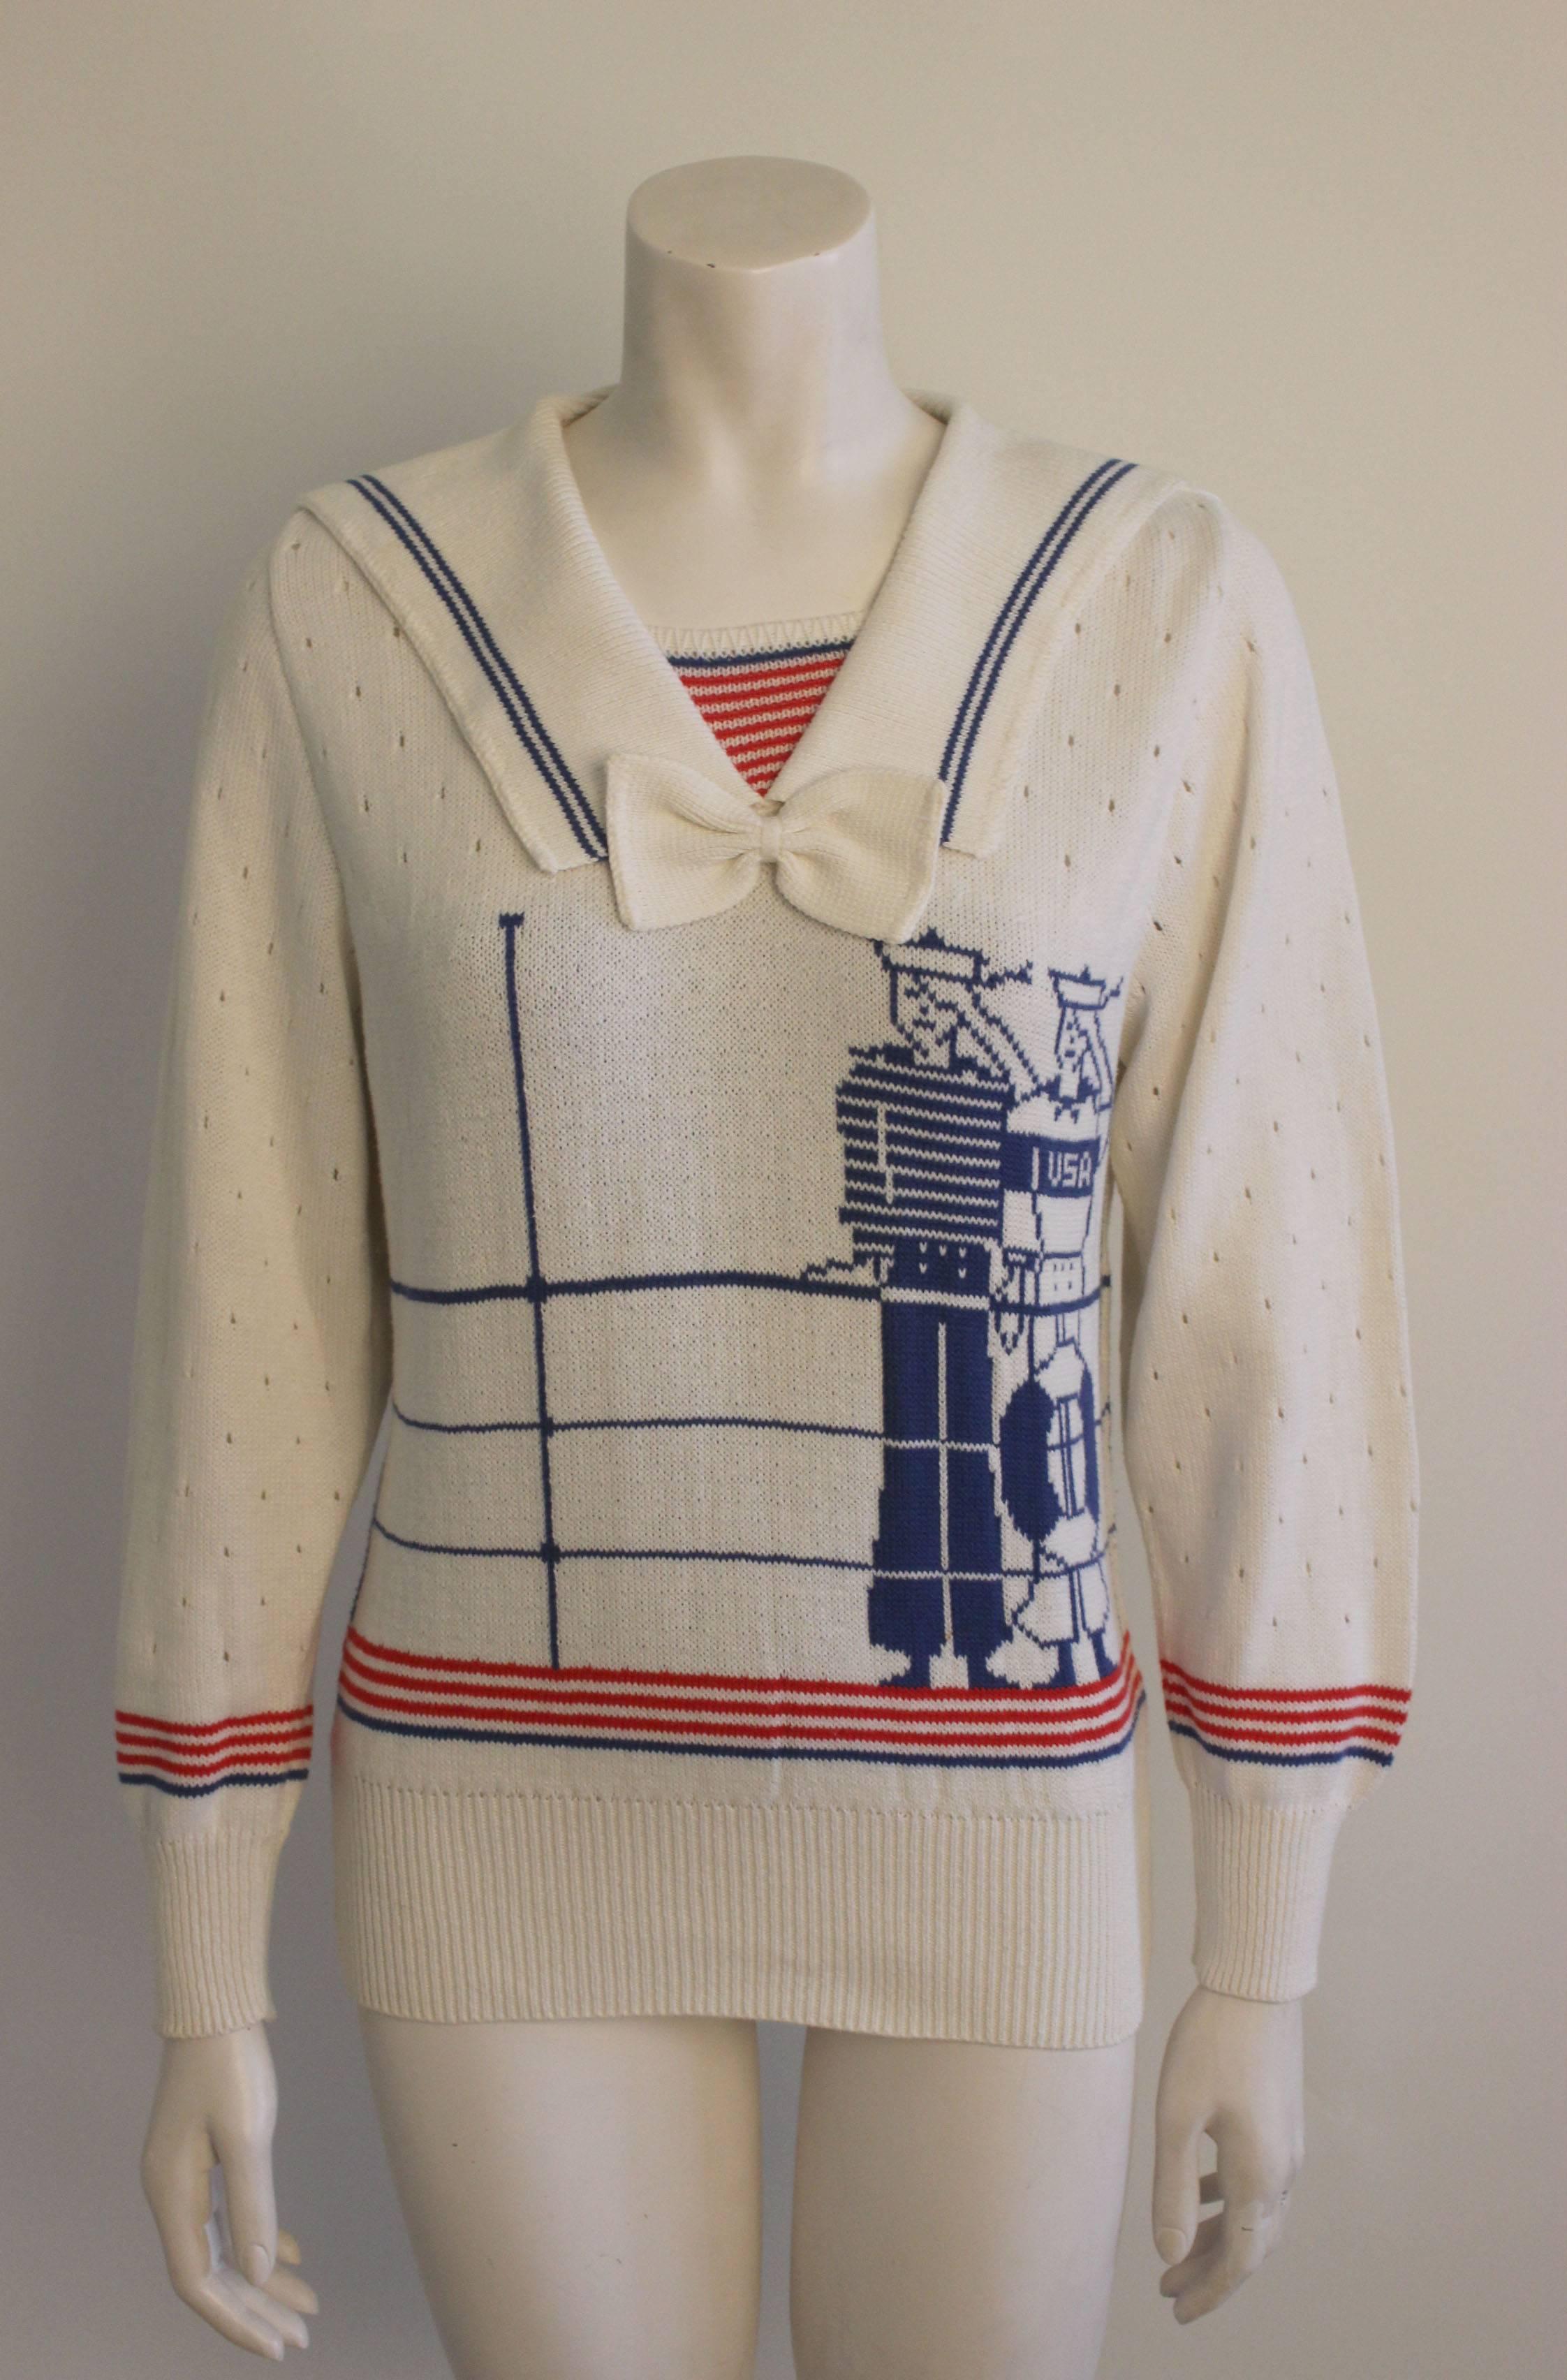 This cotton knit sweater by Ignacy Feuer has a wonderful graphic of two sailors standing shipboard. Other whimsical details add to the nautical theme: a knit tie under a sailor collar and a red & white stripe knit inset at the neckline. 